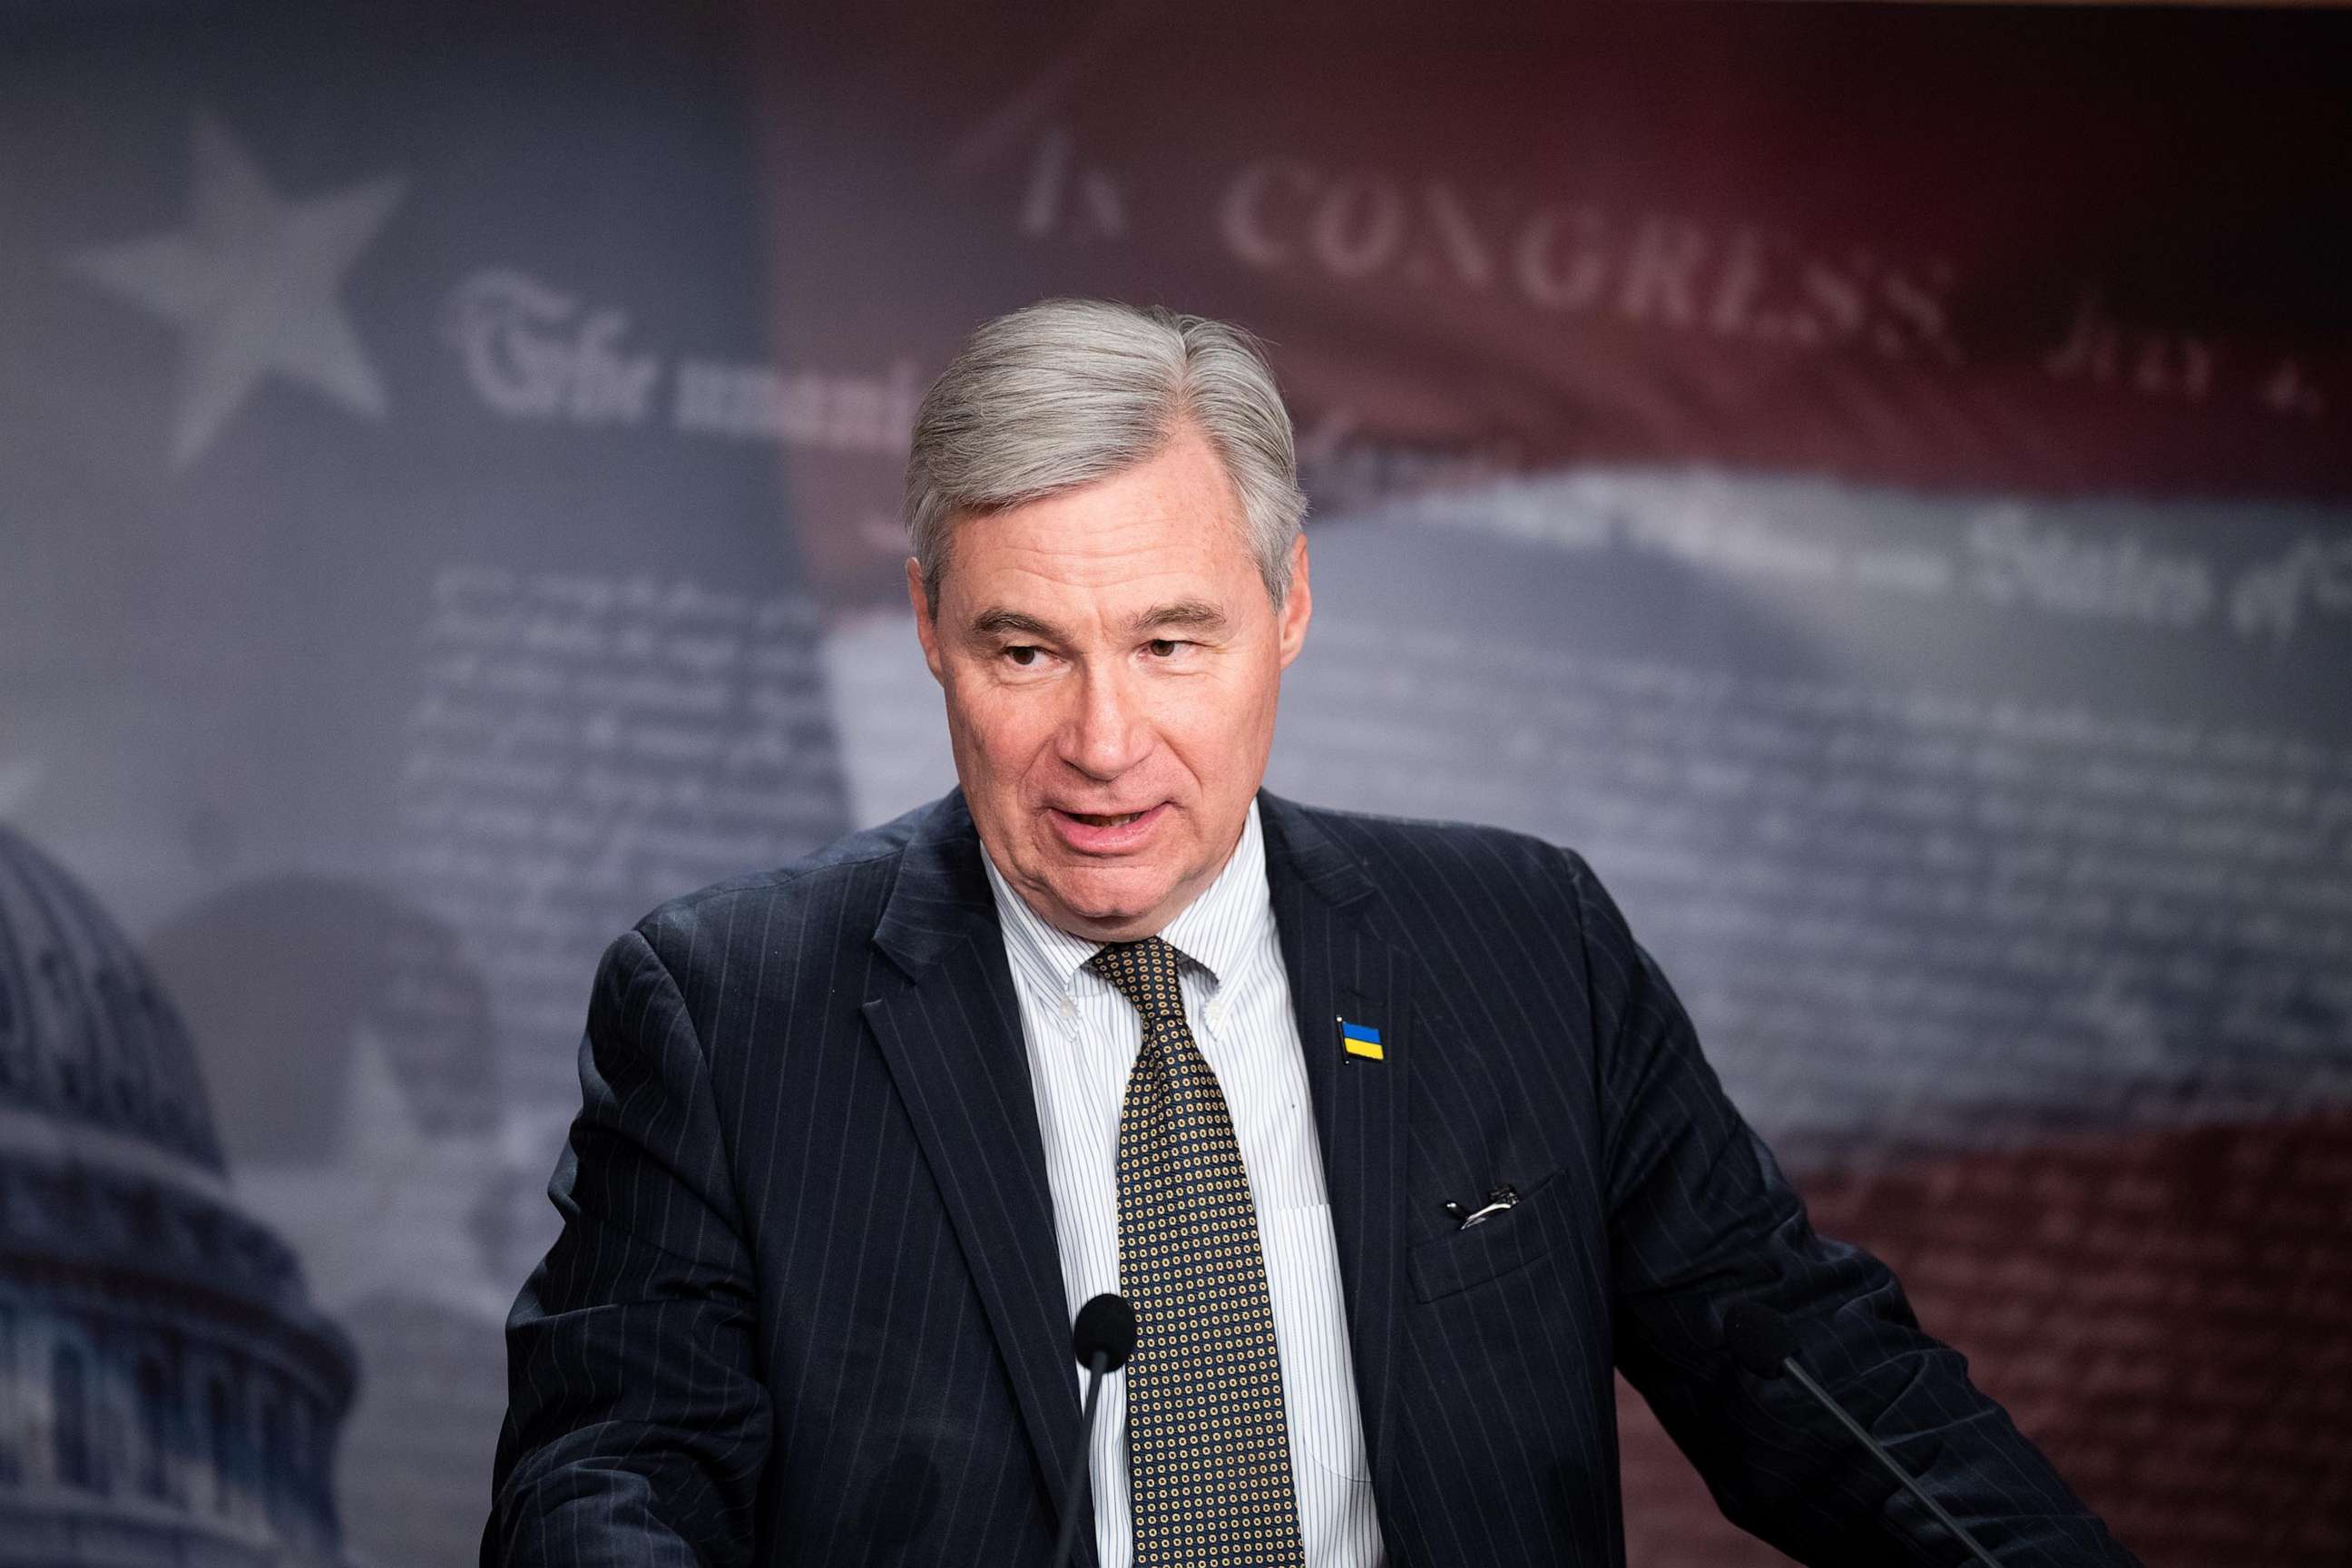 PHOTO: In this March 9, 2023, file photo, Sen. Sheldon Whitehouse speaks during the news conference at the U.S. Capitol, in Washington, D.C.